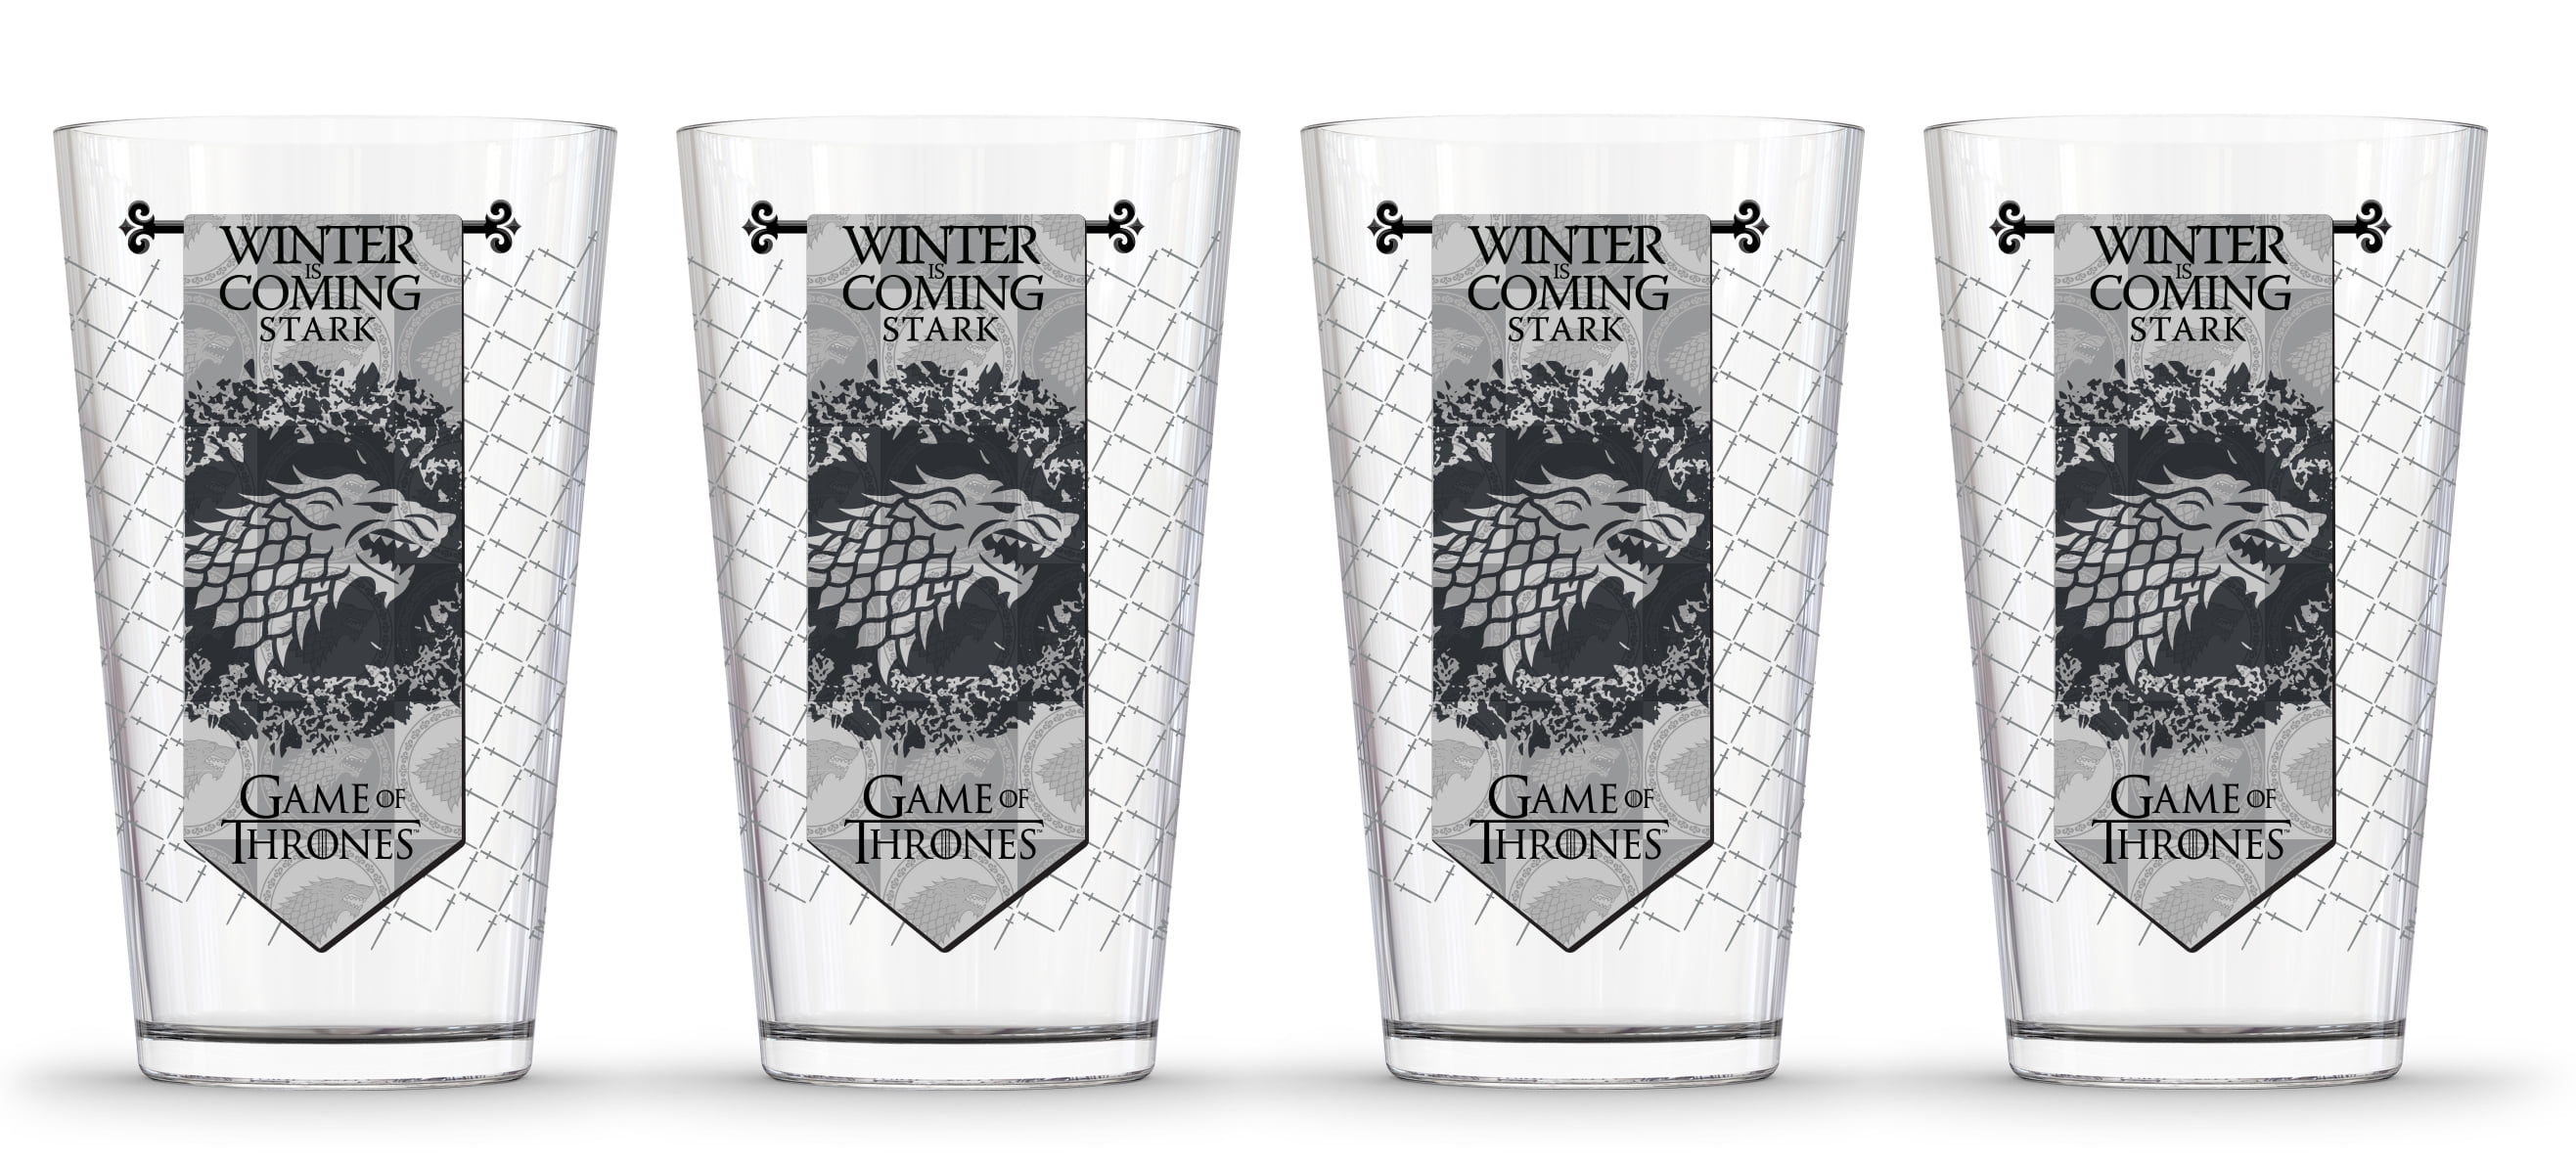 Engraved Pint Glass Game Of Thrones Beer is Coming Stark Emblem Winter is Coming 